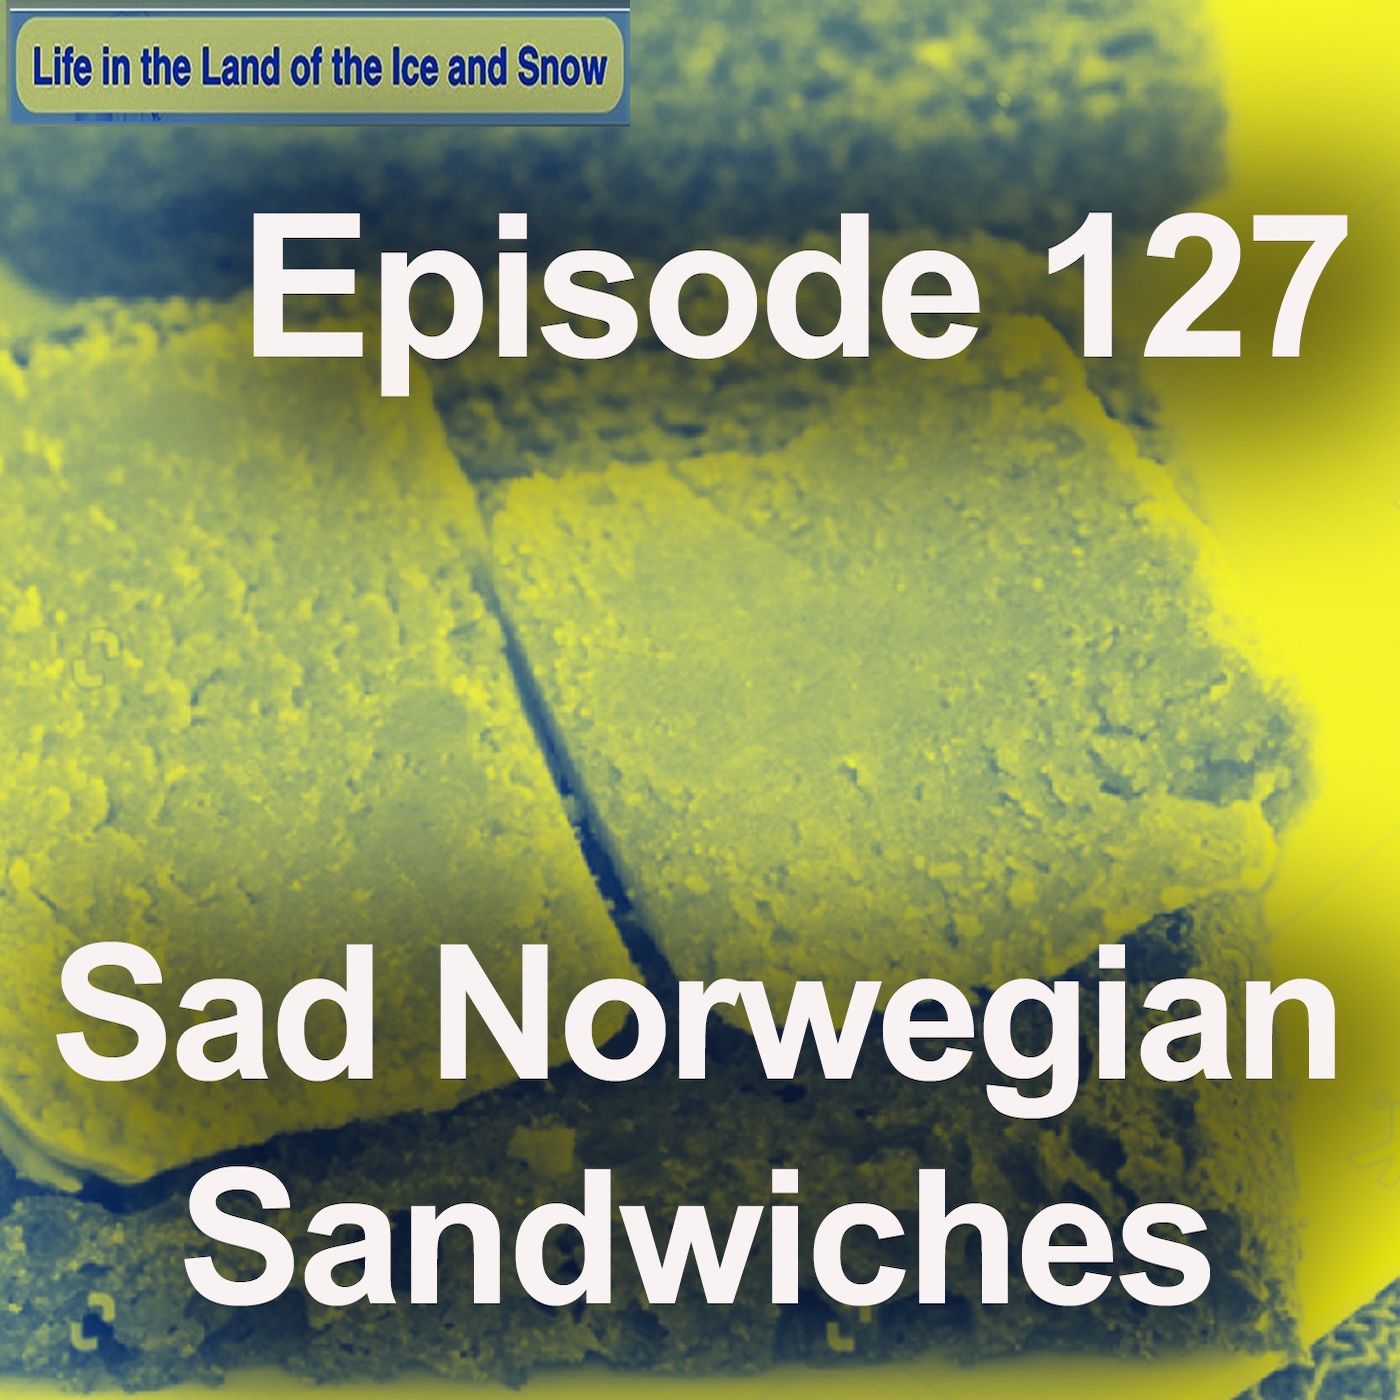 image shows a sad Norwegian sandwich with just bread and cheese